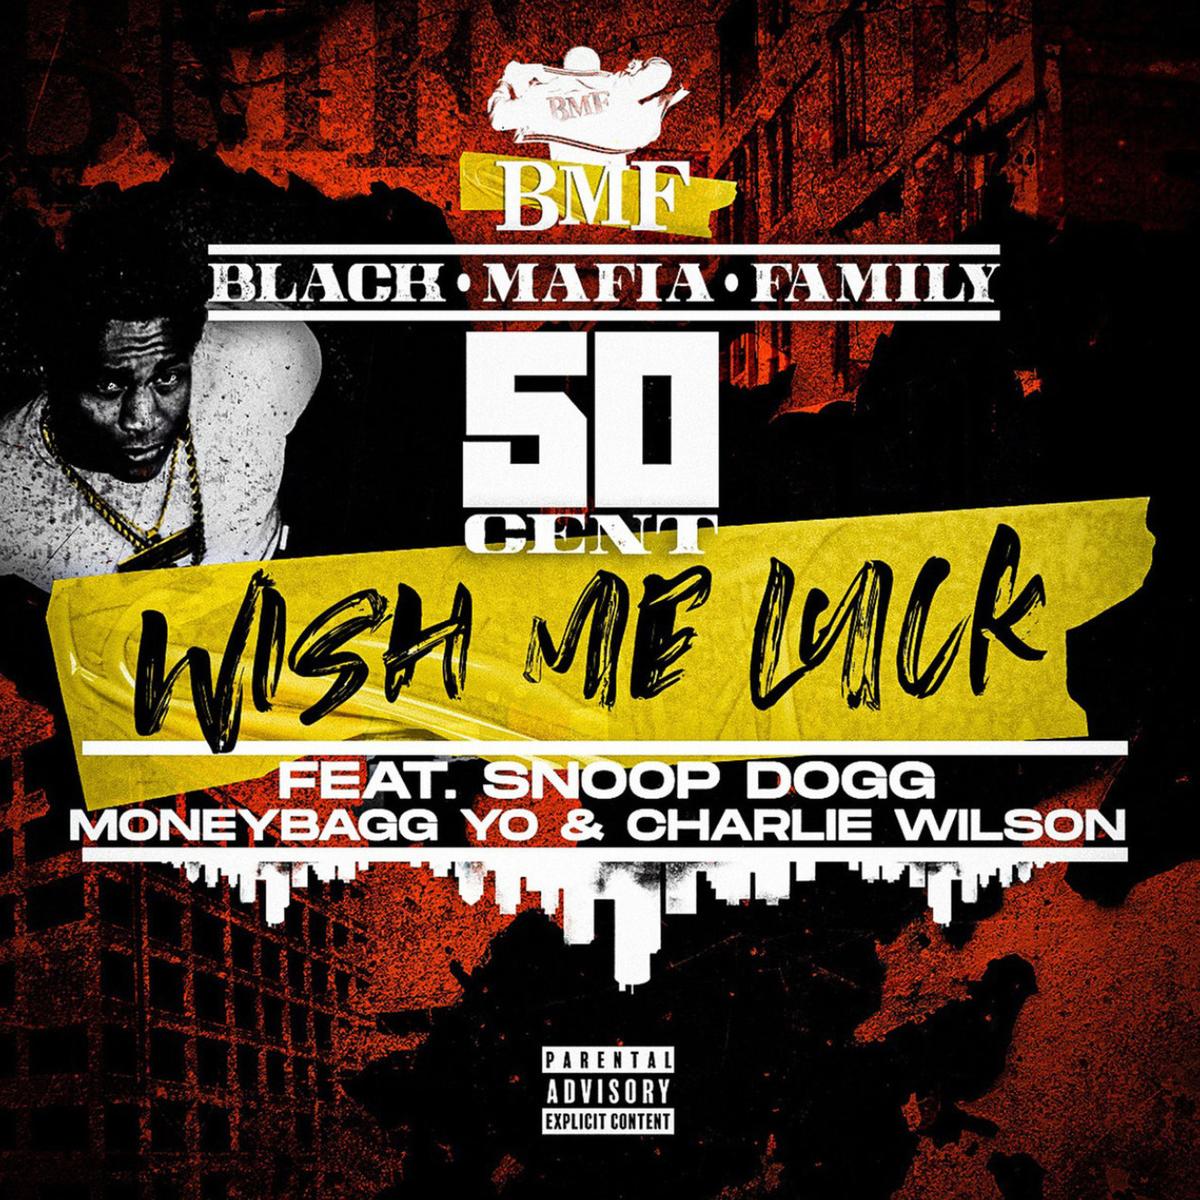 50 Cent Relies On Snoop Dogg, Charlie Wilson, and MoneyBagg Yo For “Wish Me Luck”